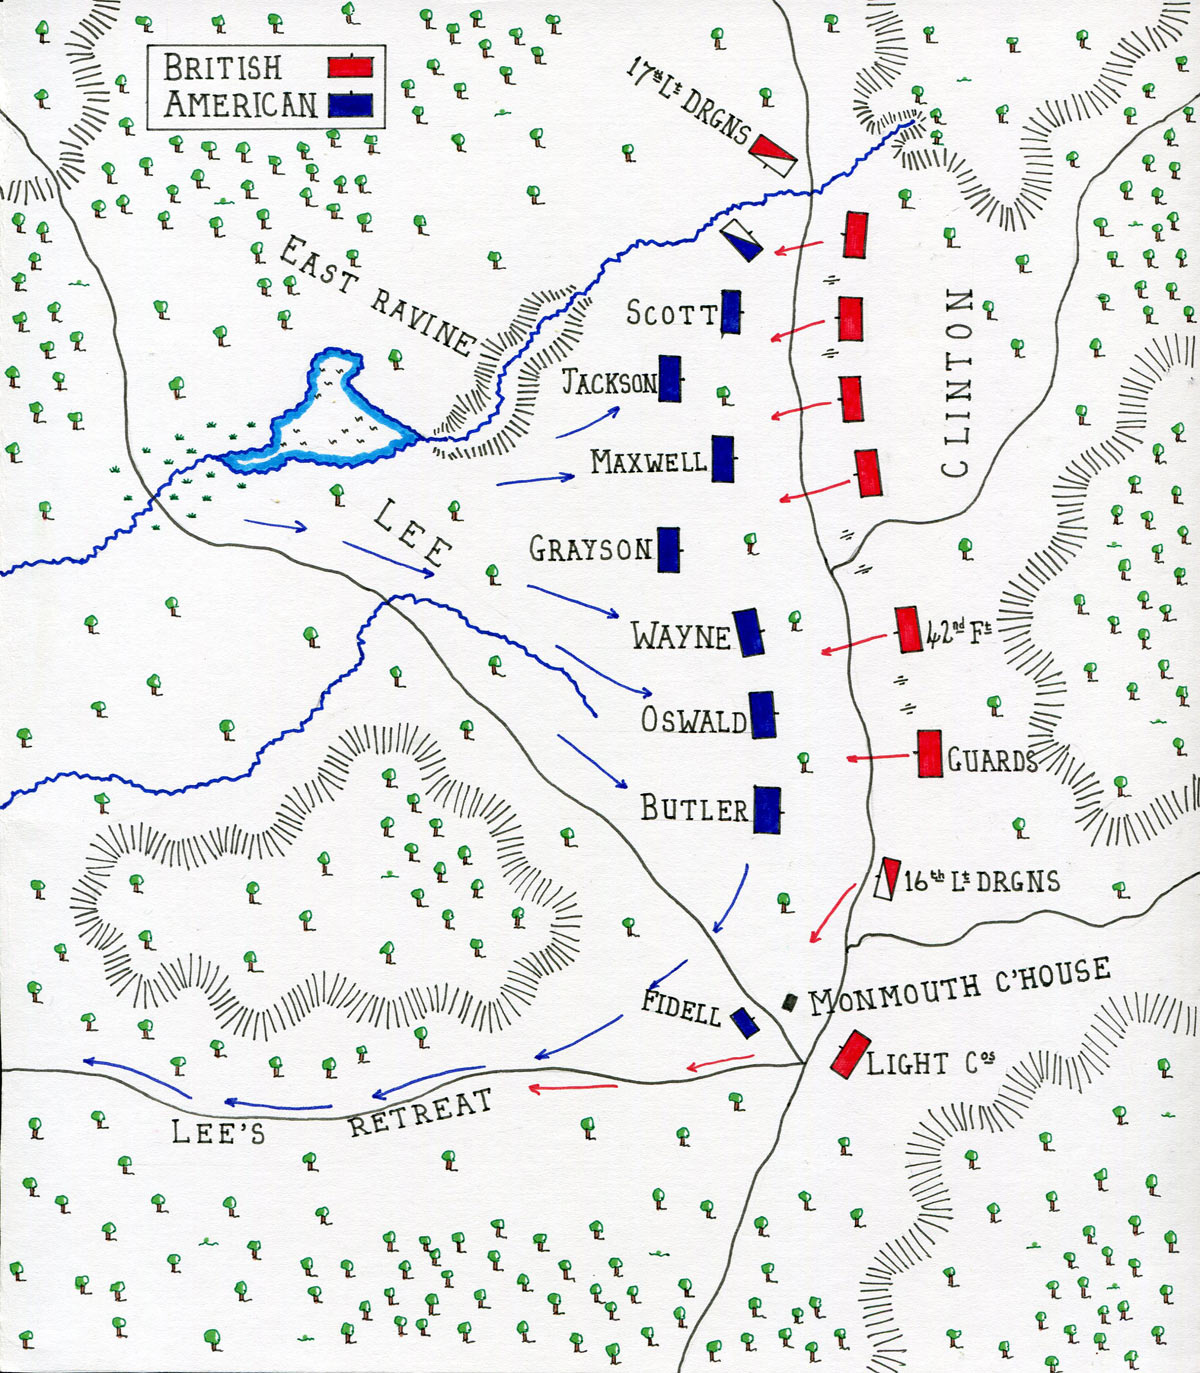 Image result for the battle map of the battle of monmouth during the american revolution